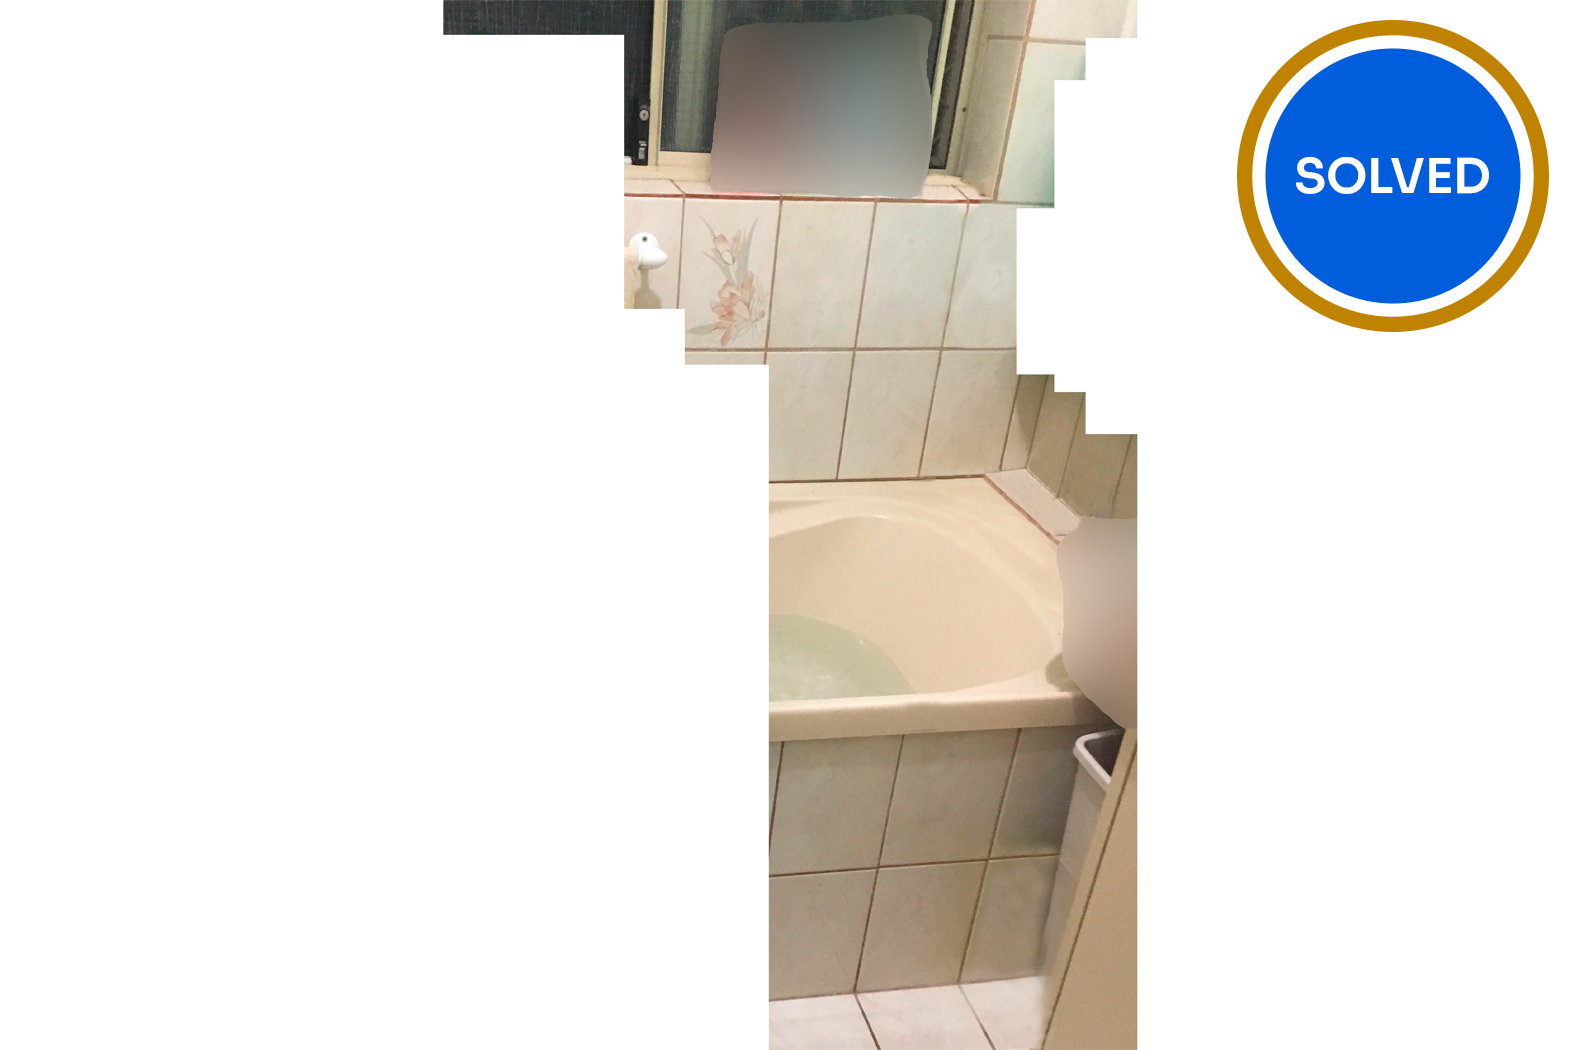 Bathroom with bath tub and tiles with solved banner